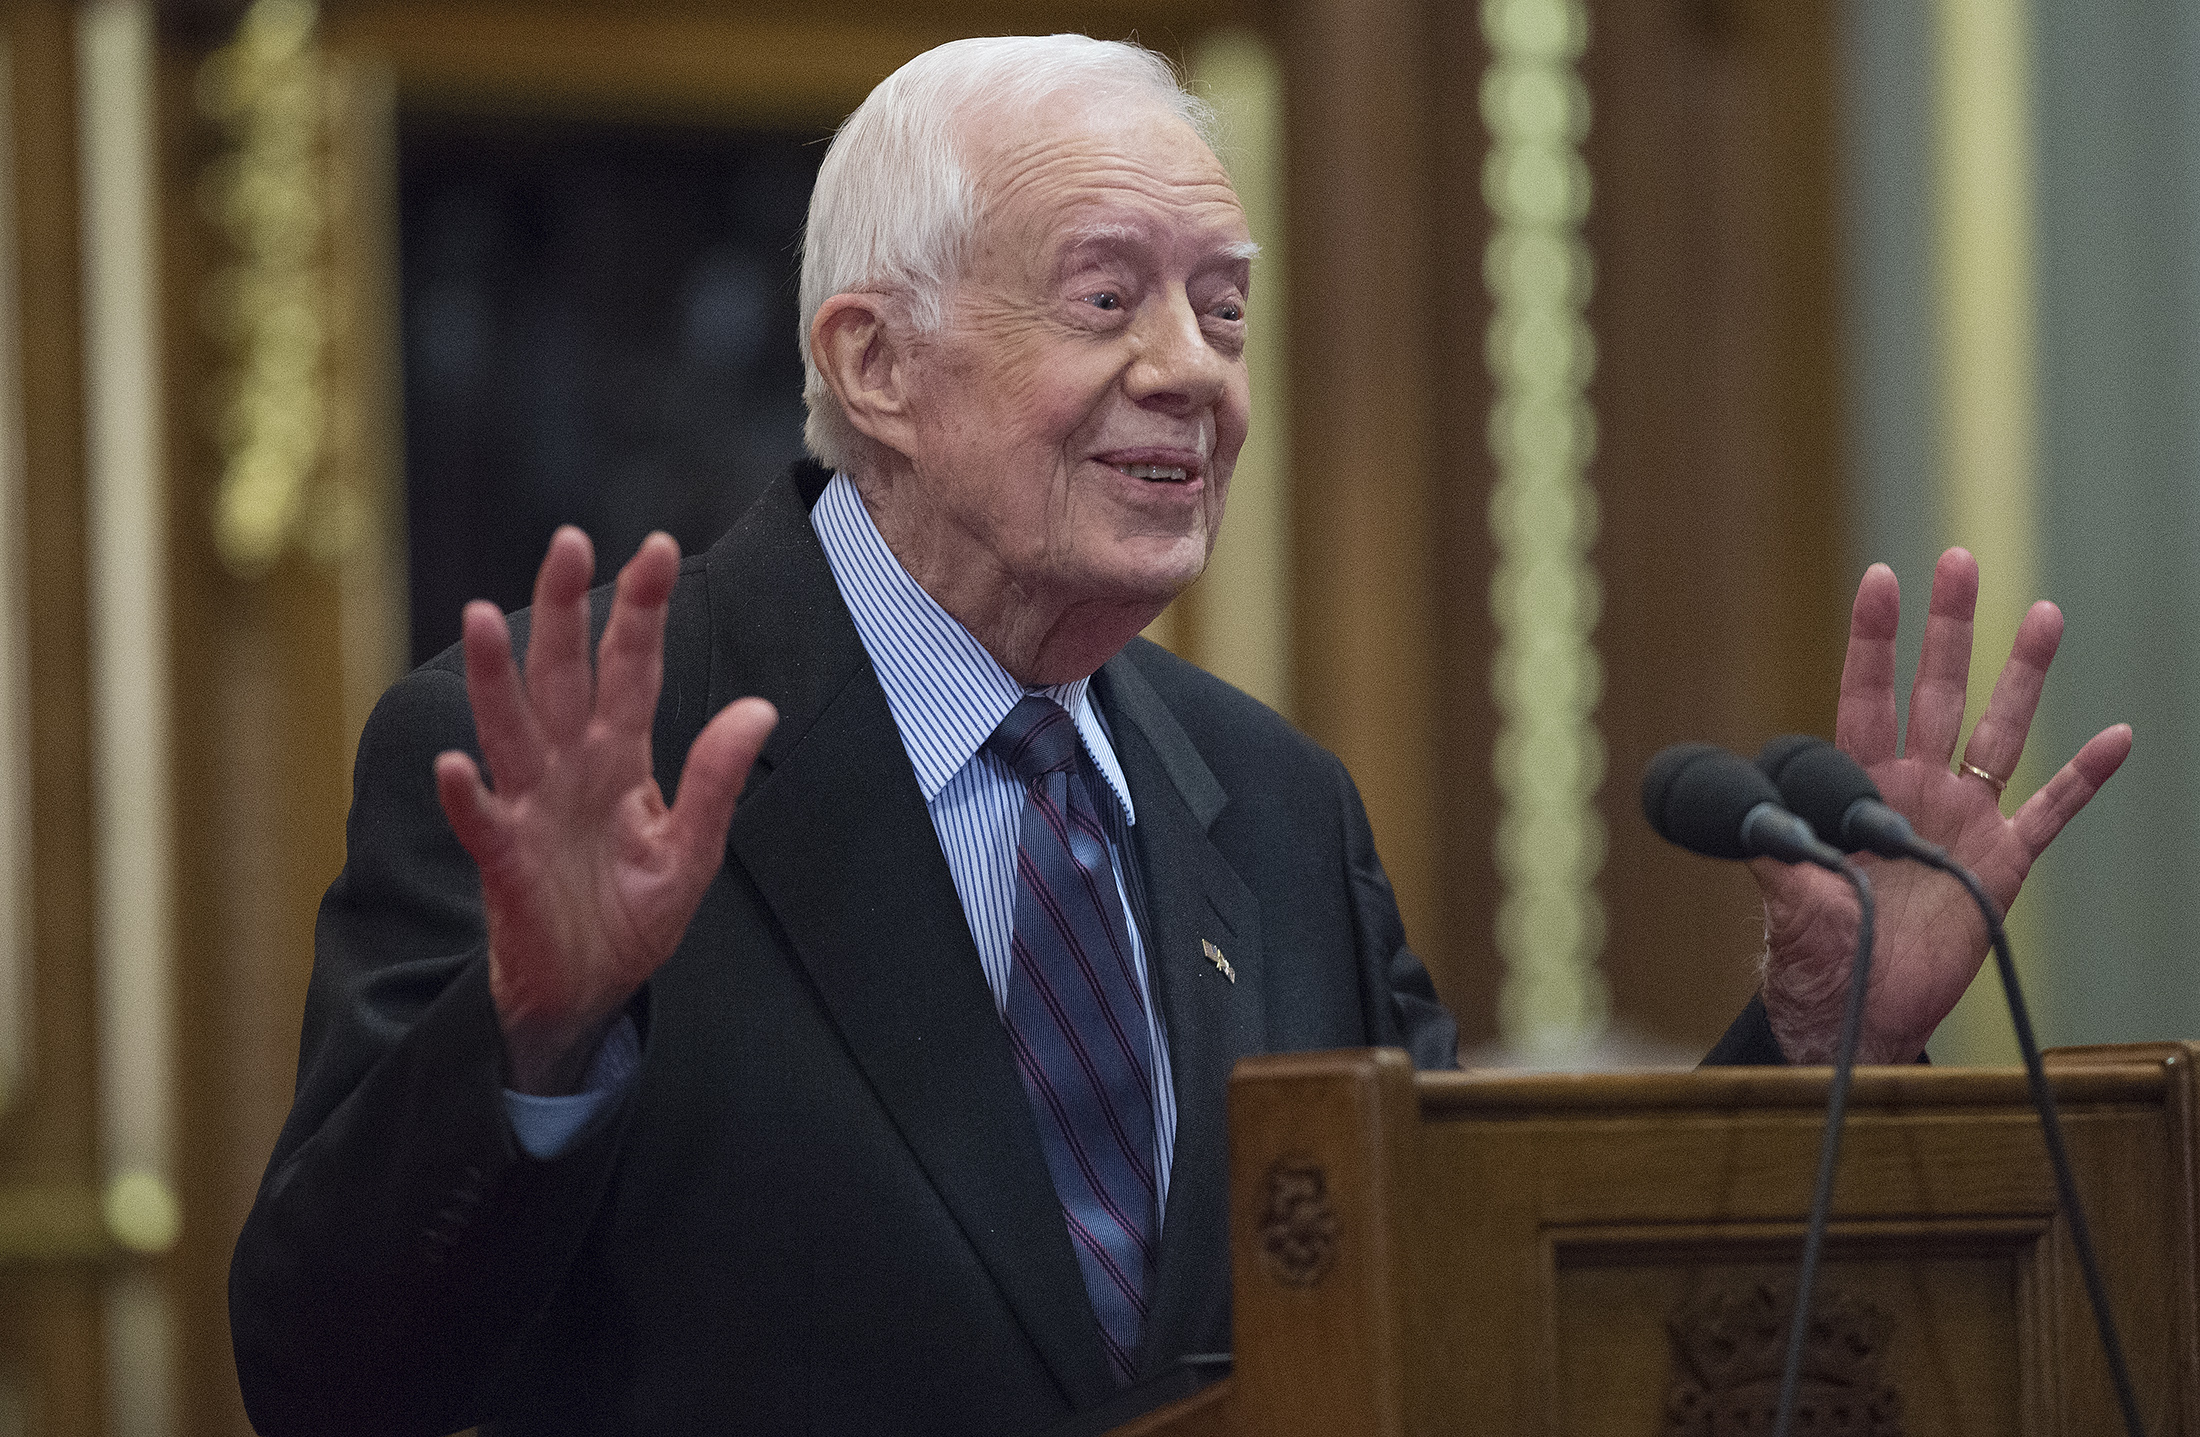 Former U.S. President Jimmy Carter delivers a lecture on the eradication of the Guinea worm at the House of Lords on Feb. 3, 2016 in London. (Eddie Mullholland—WPA Pool/Getty Images)